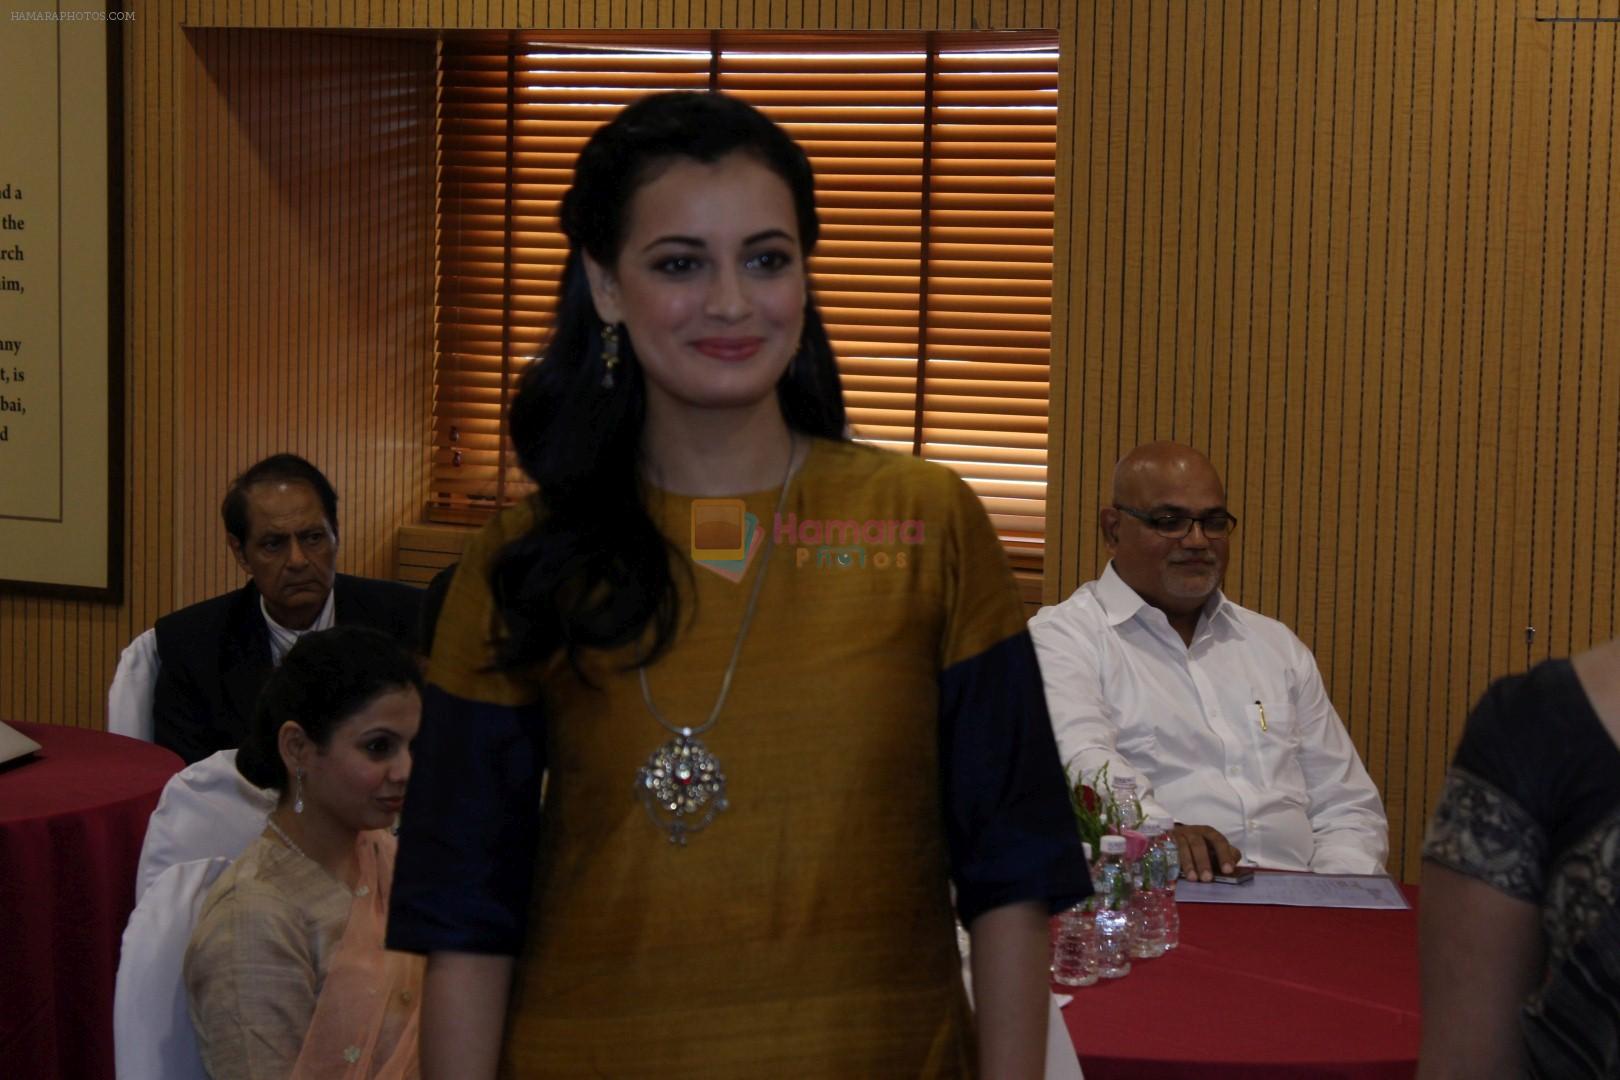 Dia Mirza attend Power Women Seminar to Celebrating Women on 16th March 2017